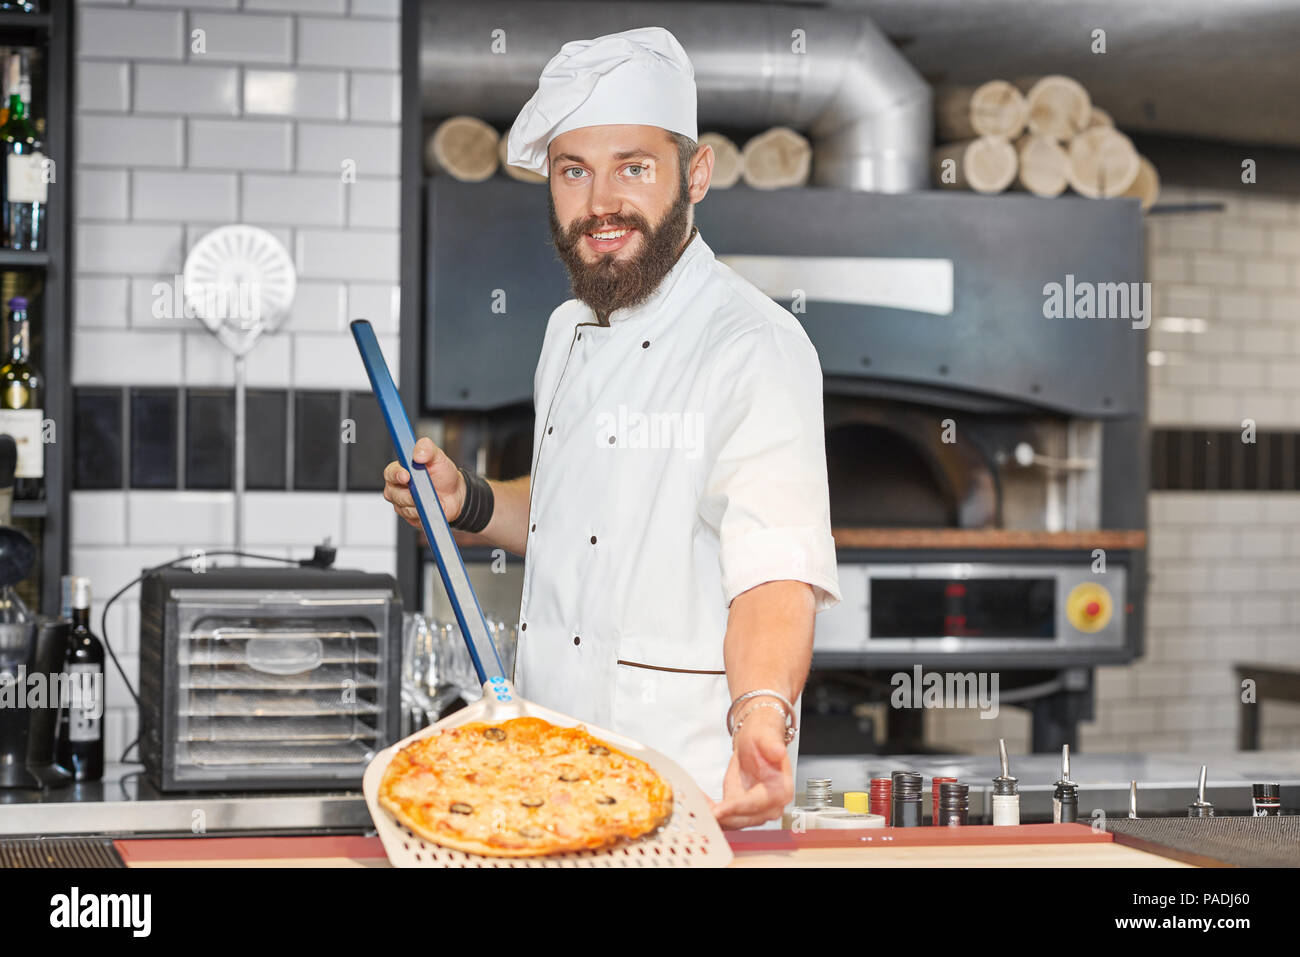 Front view of baker wearing chef's tunic and keeping pizza on metallic shovel. Working on spacy restaurant's kitchen with big oven and wooden timbers behind. Man looking at camera, feeling happy. Stock Photo